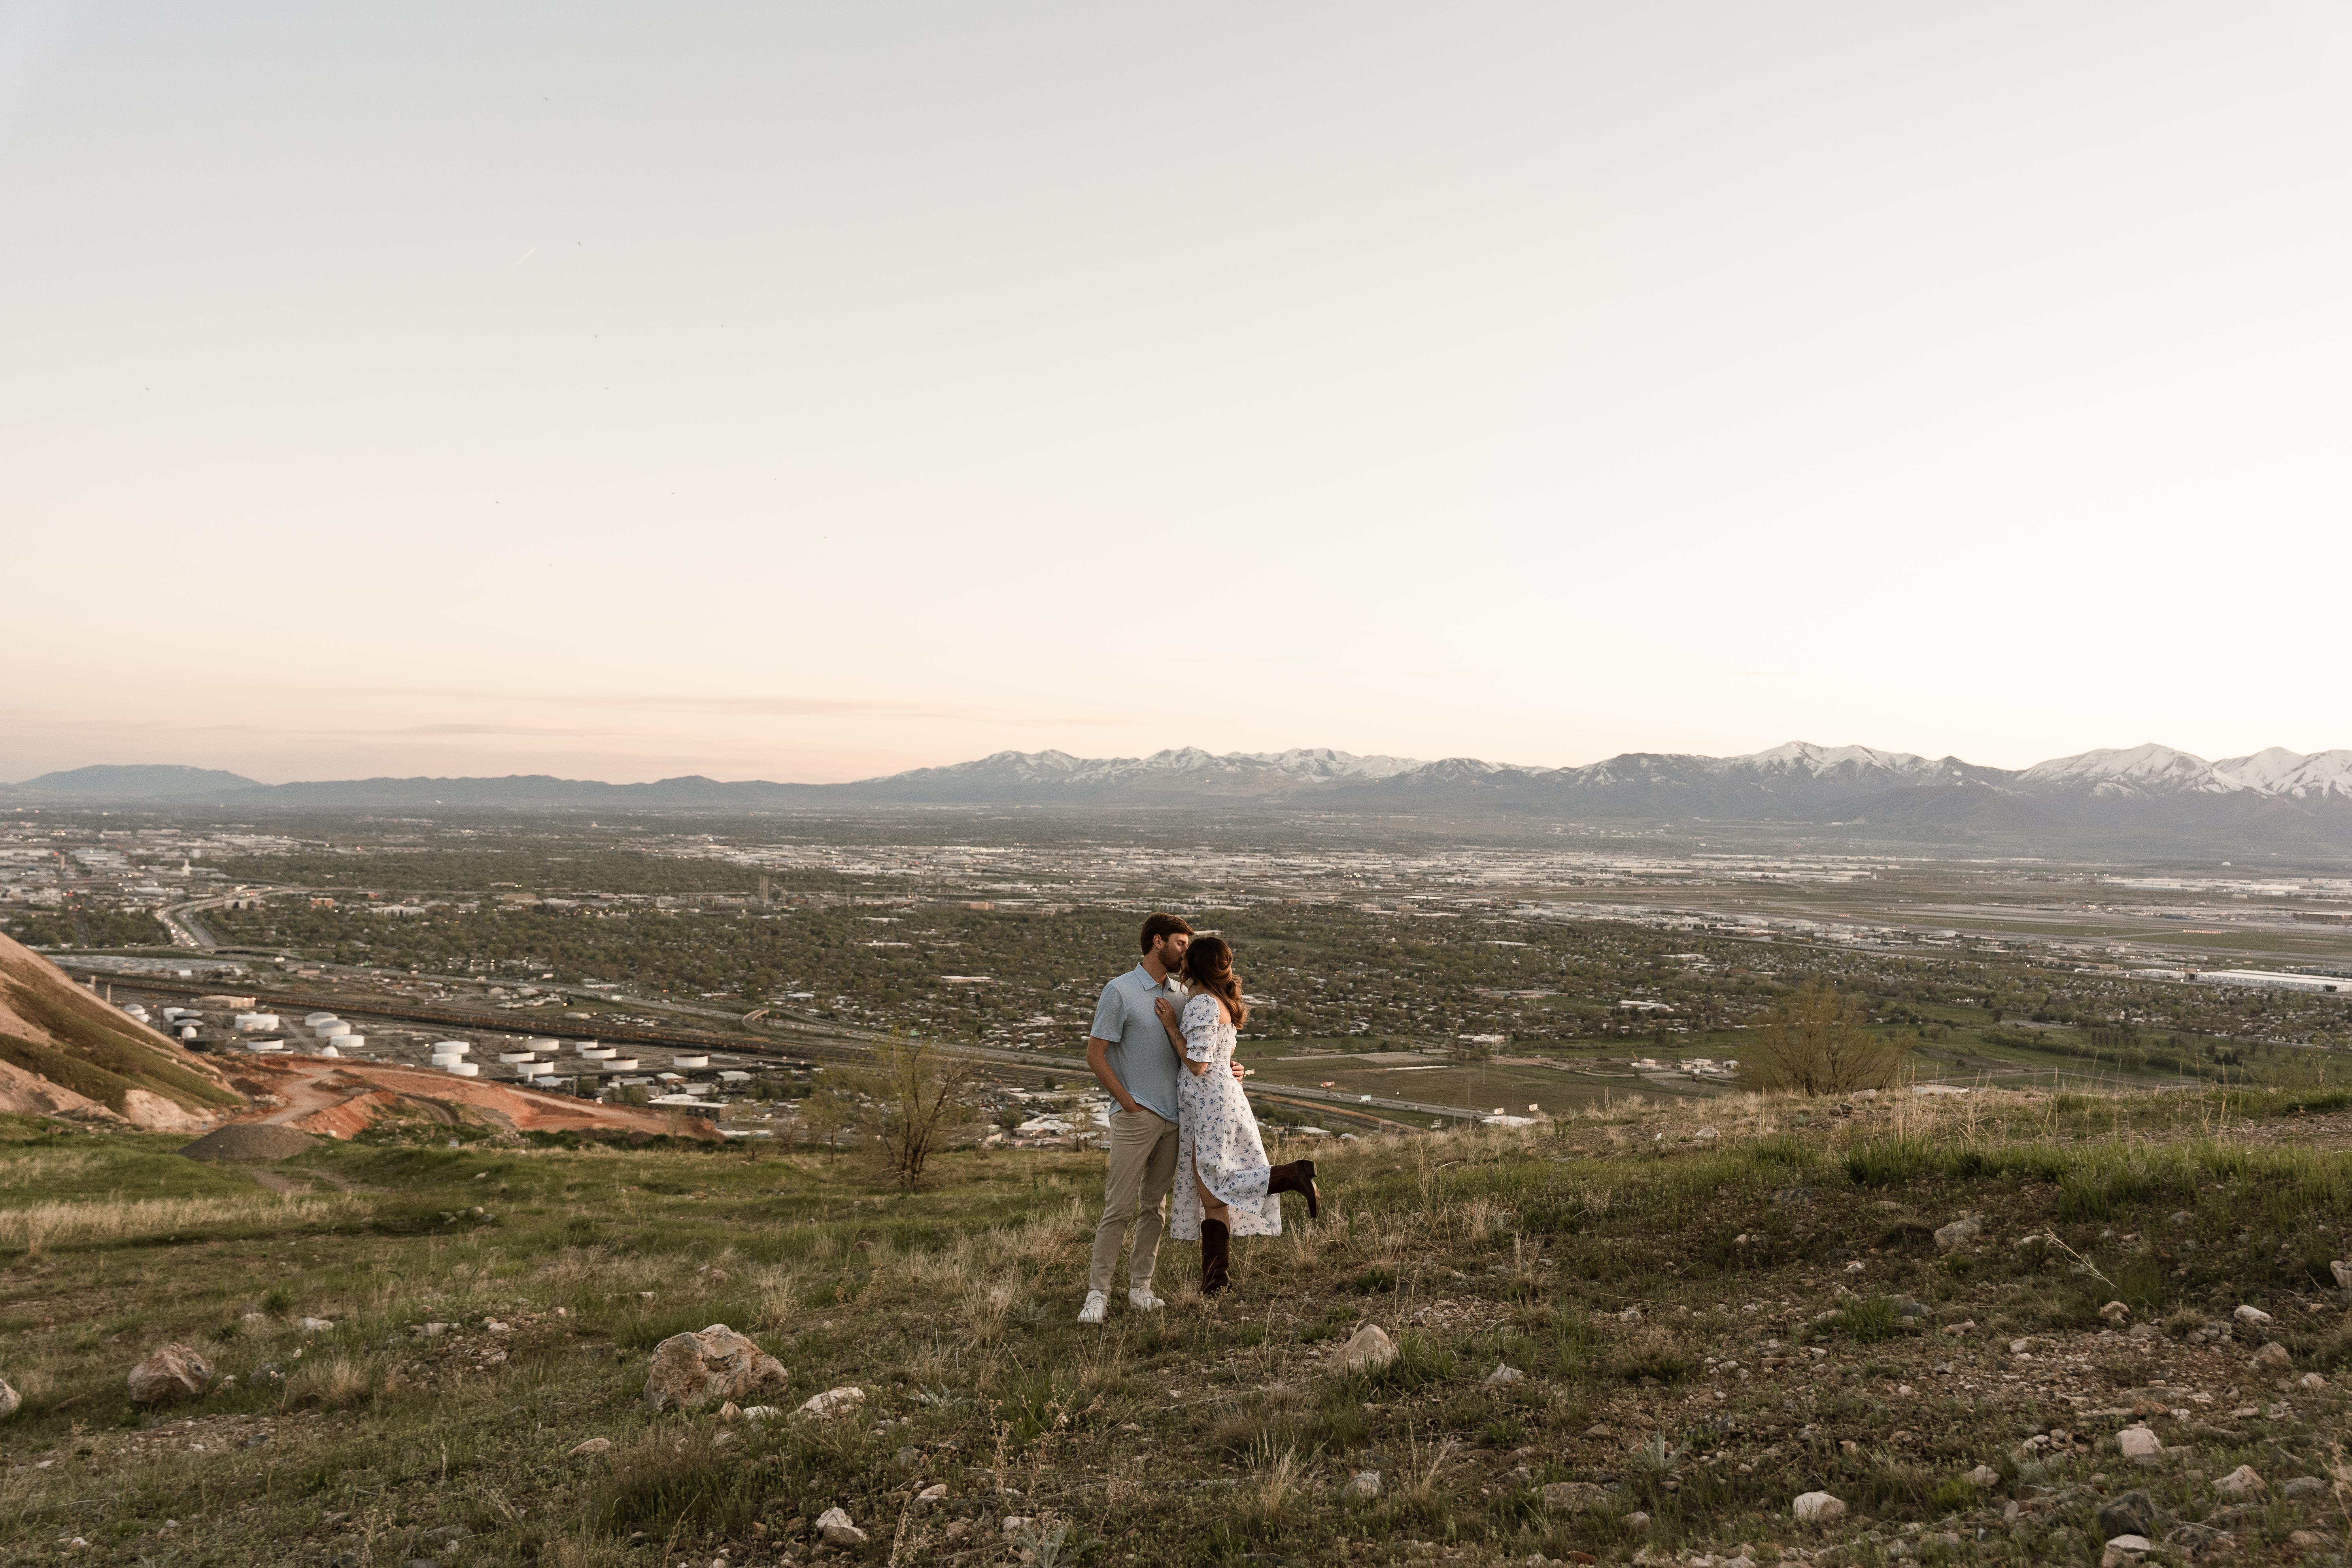 The Wedding Website of Andie Mace and Cam Arnold